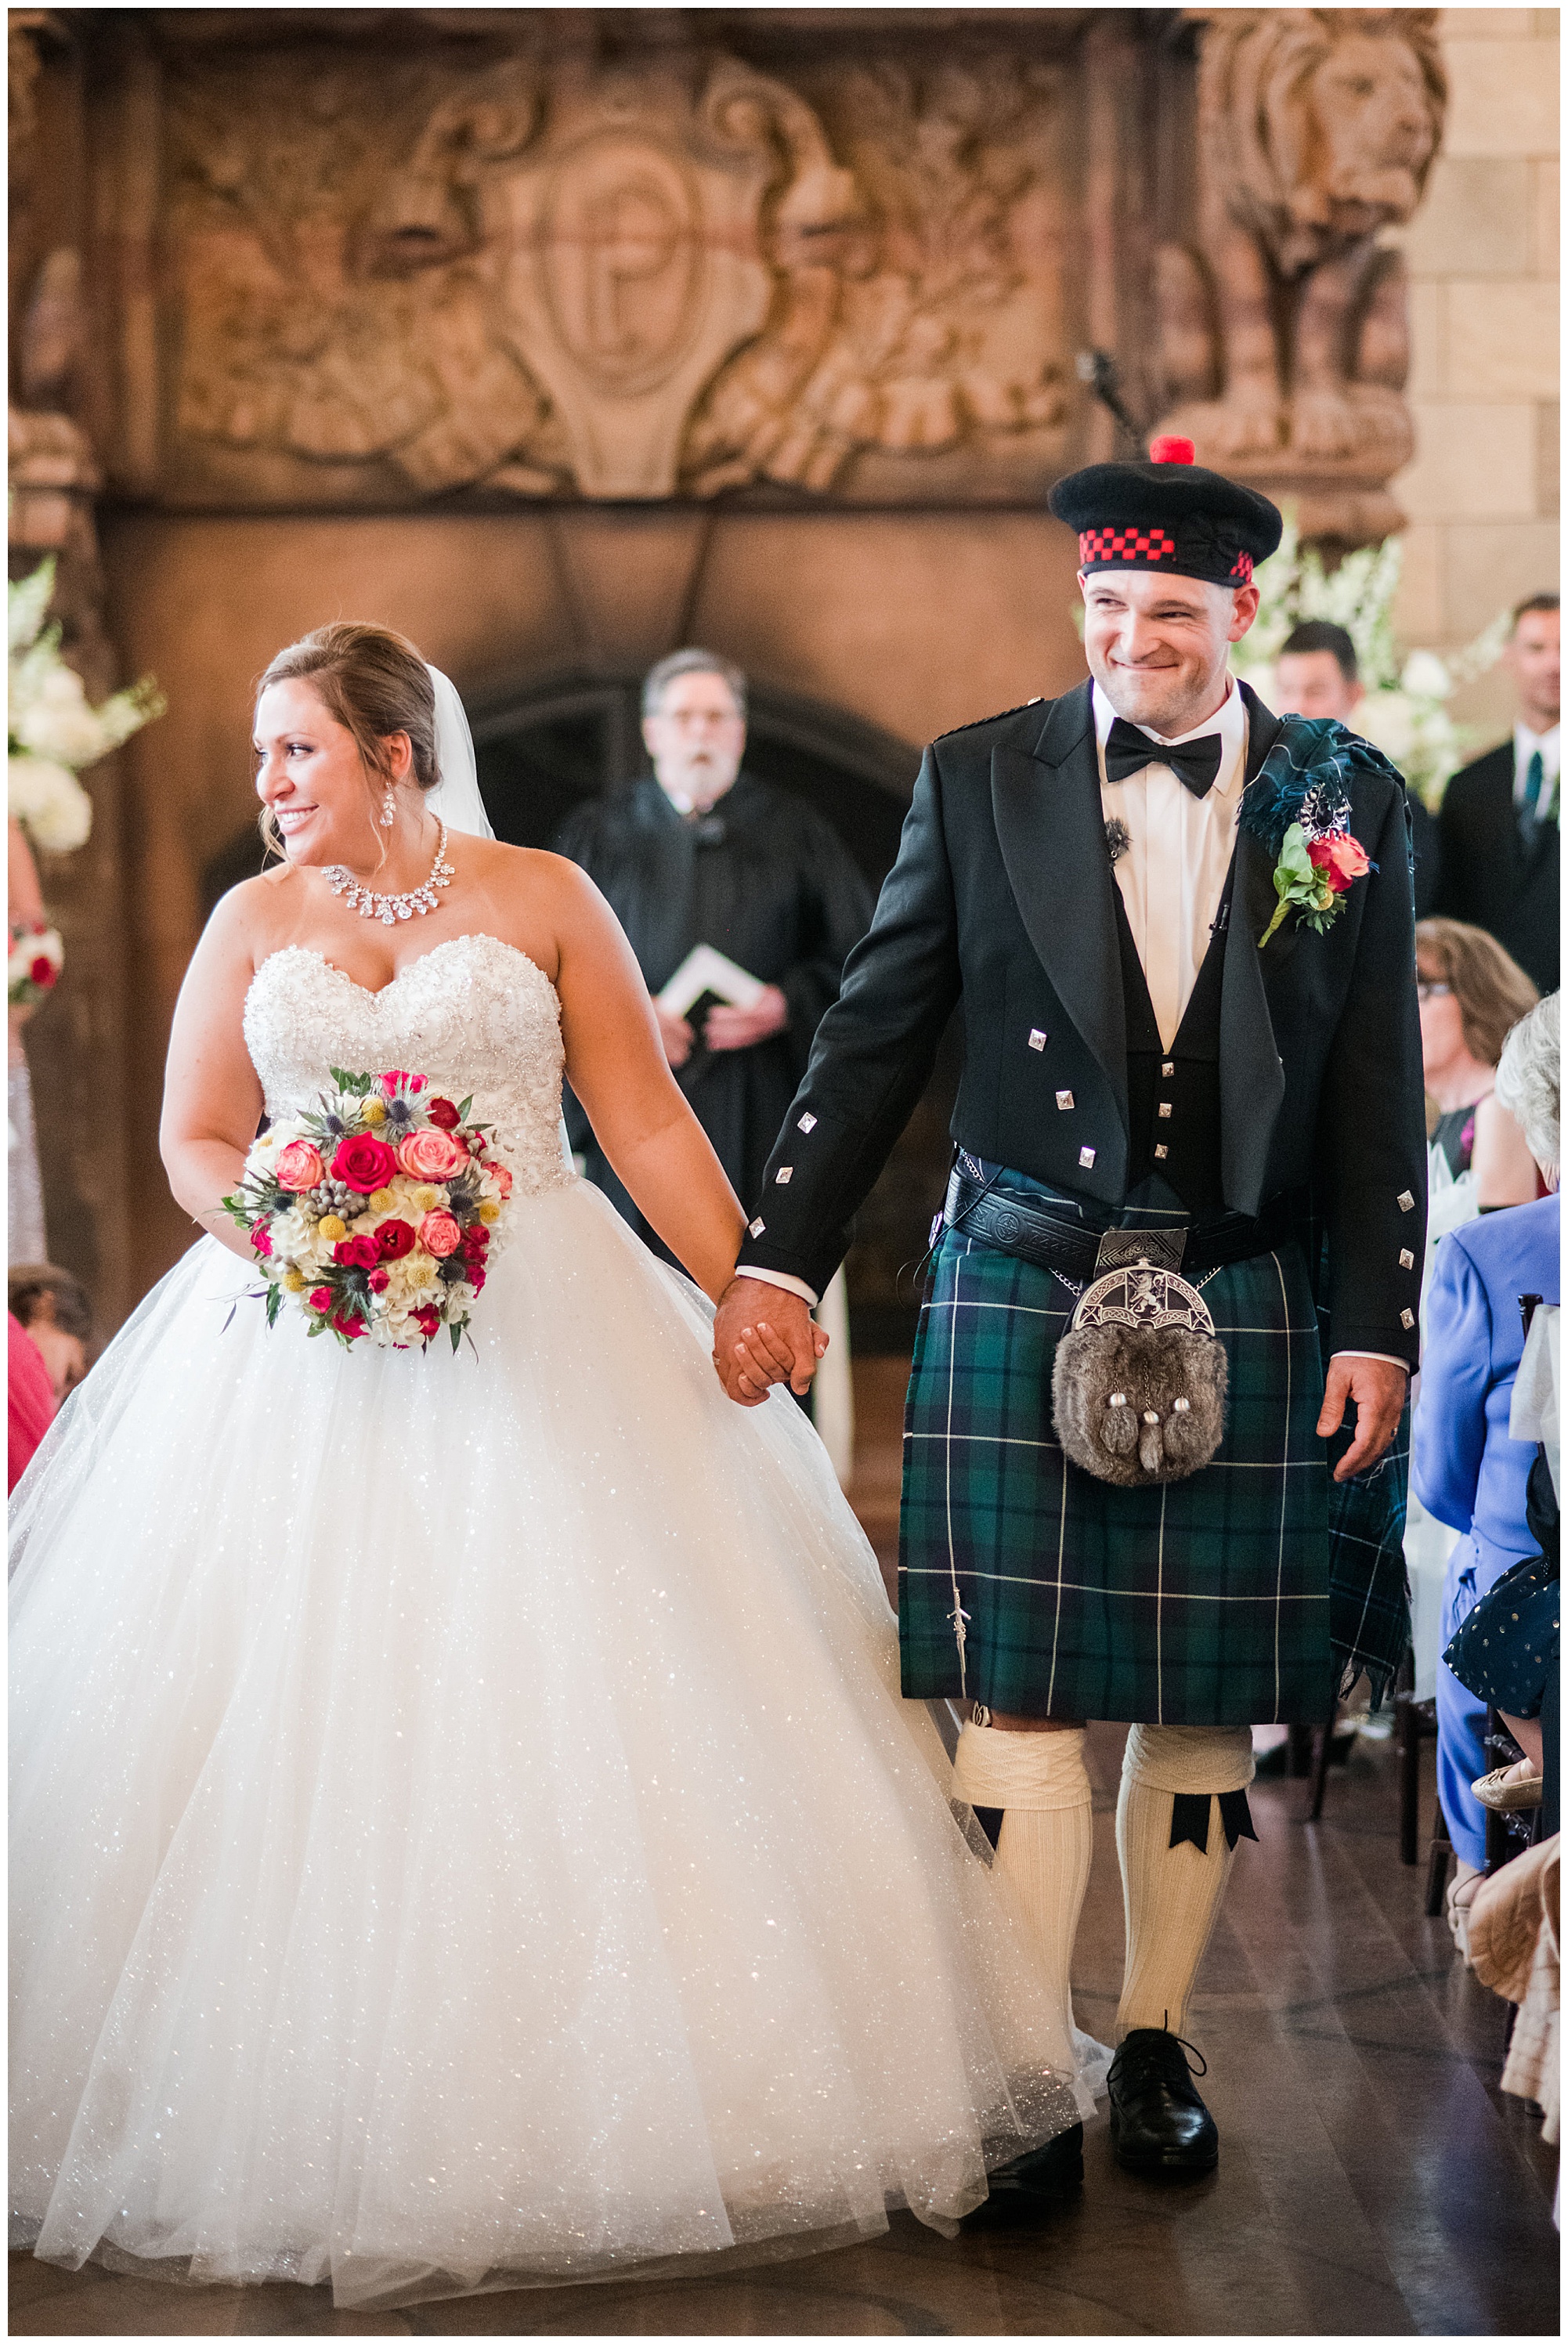 just married photo. bride and groom holding hands and walking down the aisle. groom is wearing kilt and tartan. bride is wearing princess cut ballgown wedding dress that is sparkly. dover hall estate ballroom venue is in the backdrop.